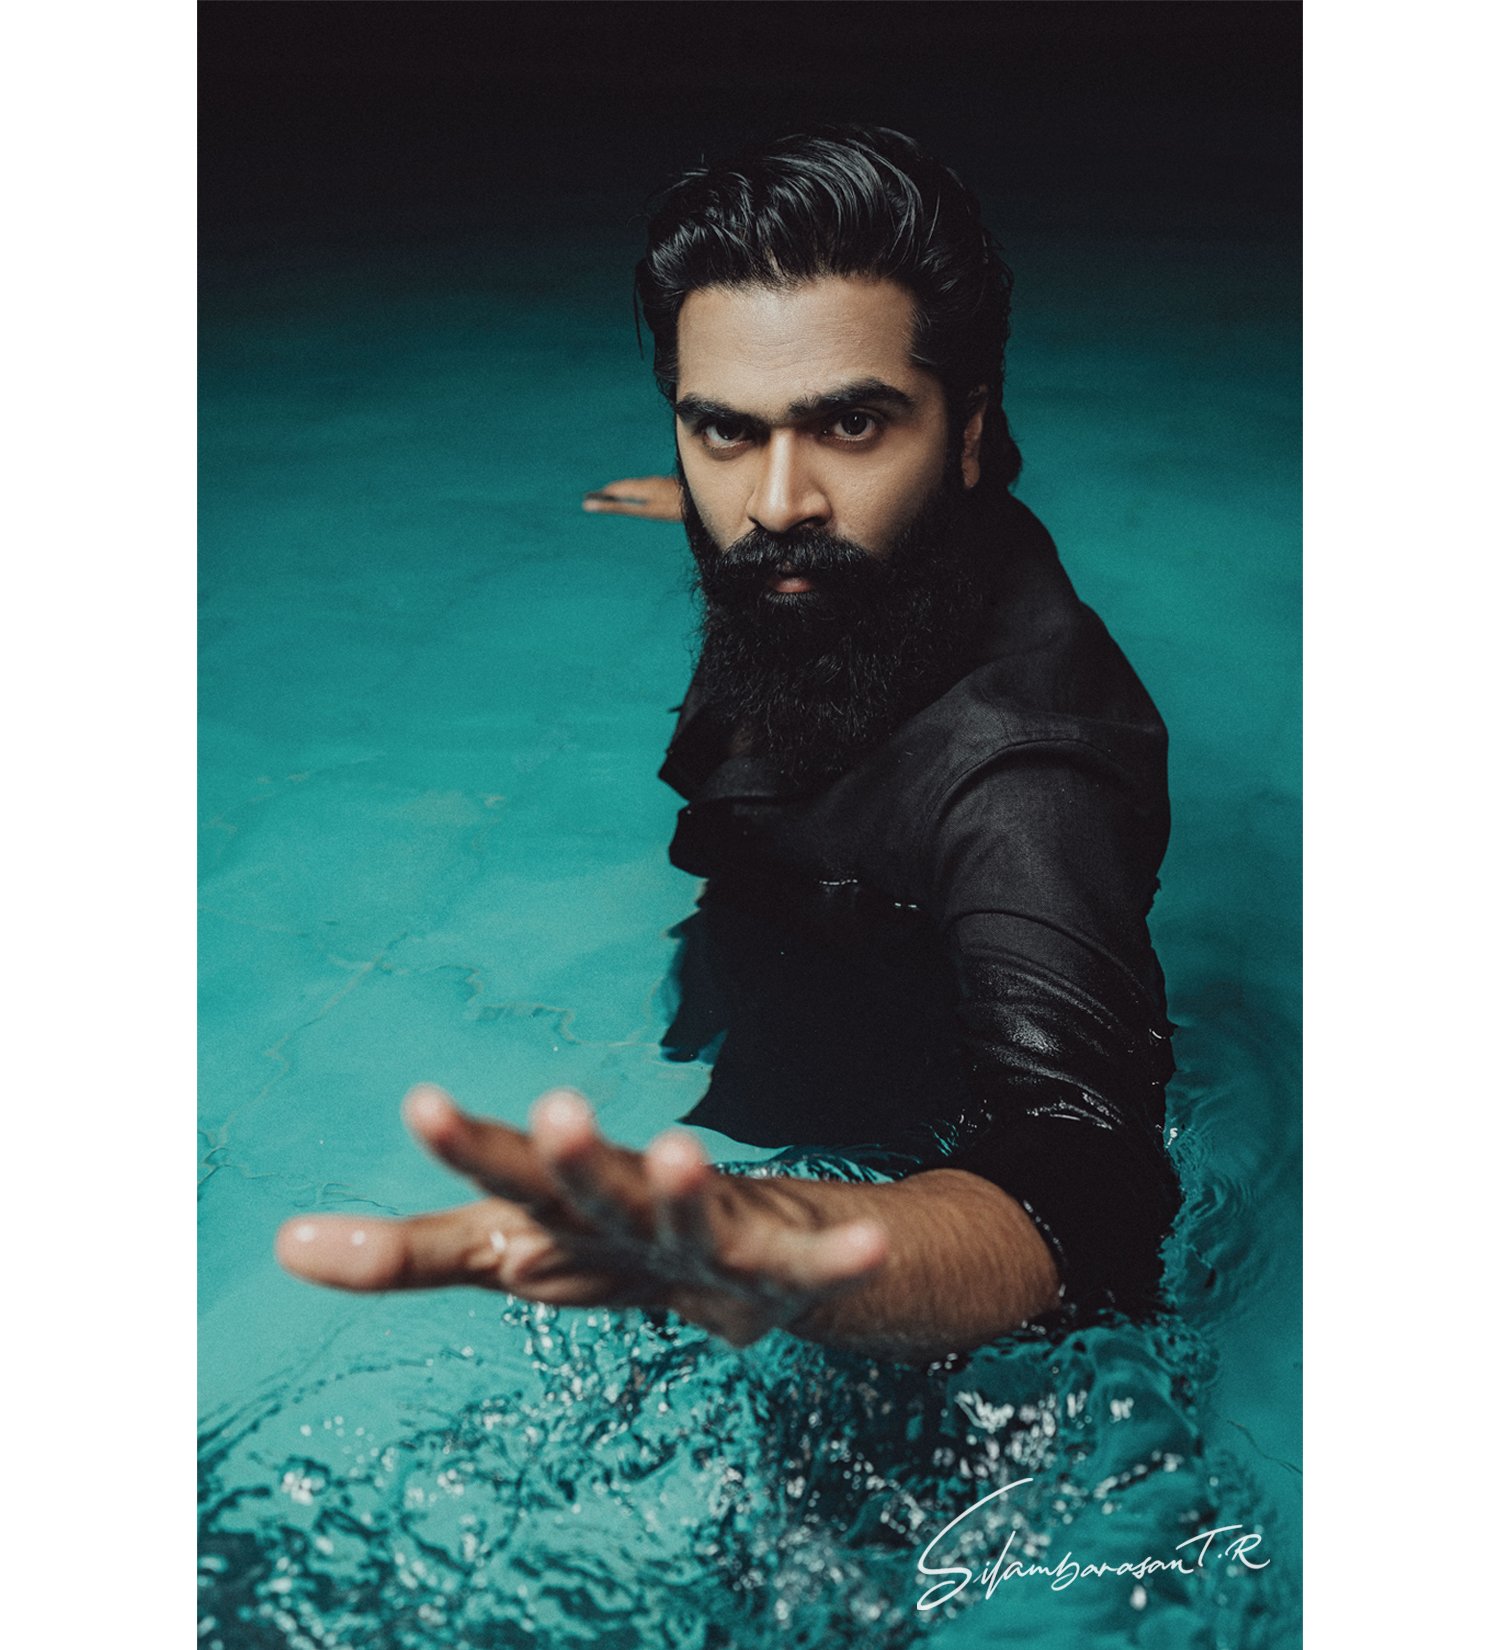 STR's shirtless pic showing off his toned muscles is going viral